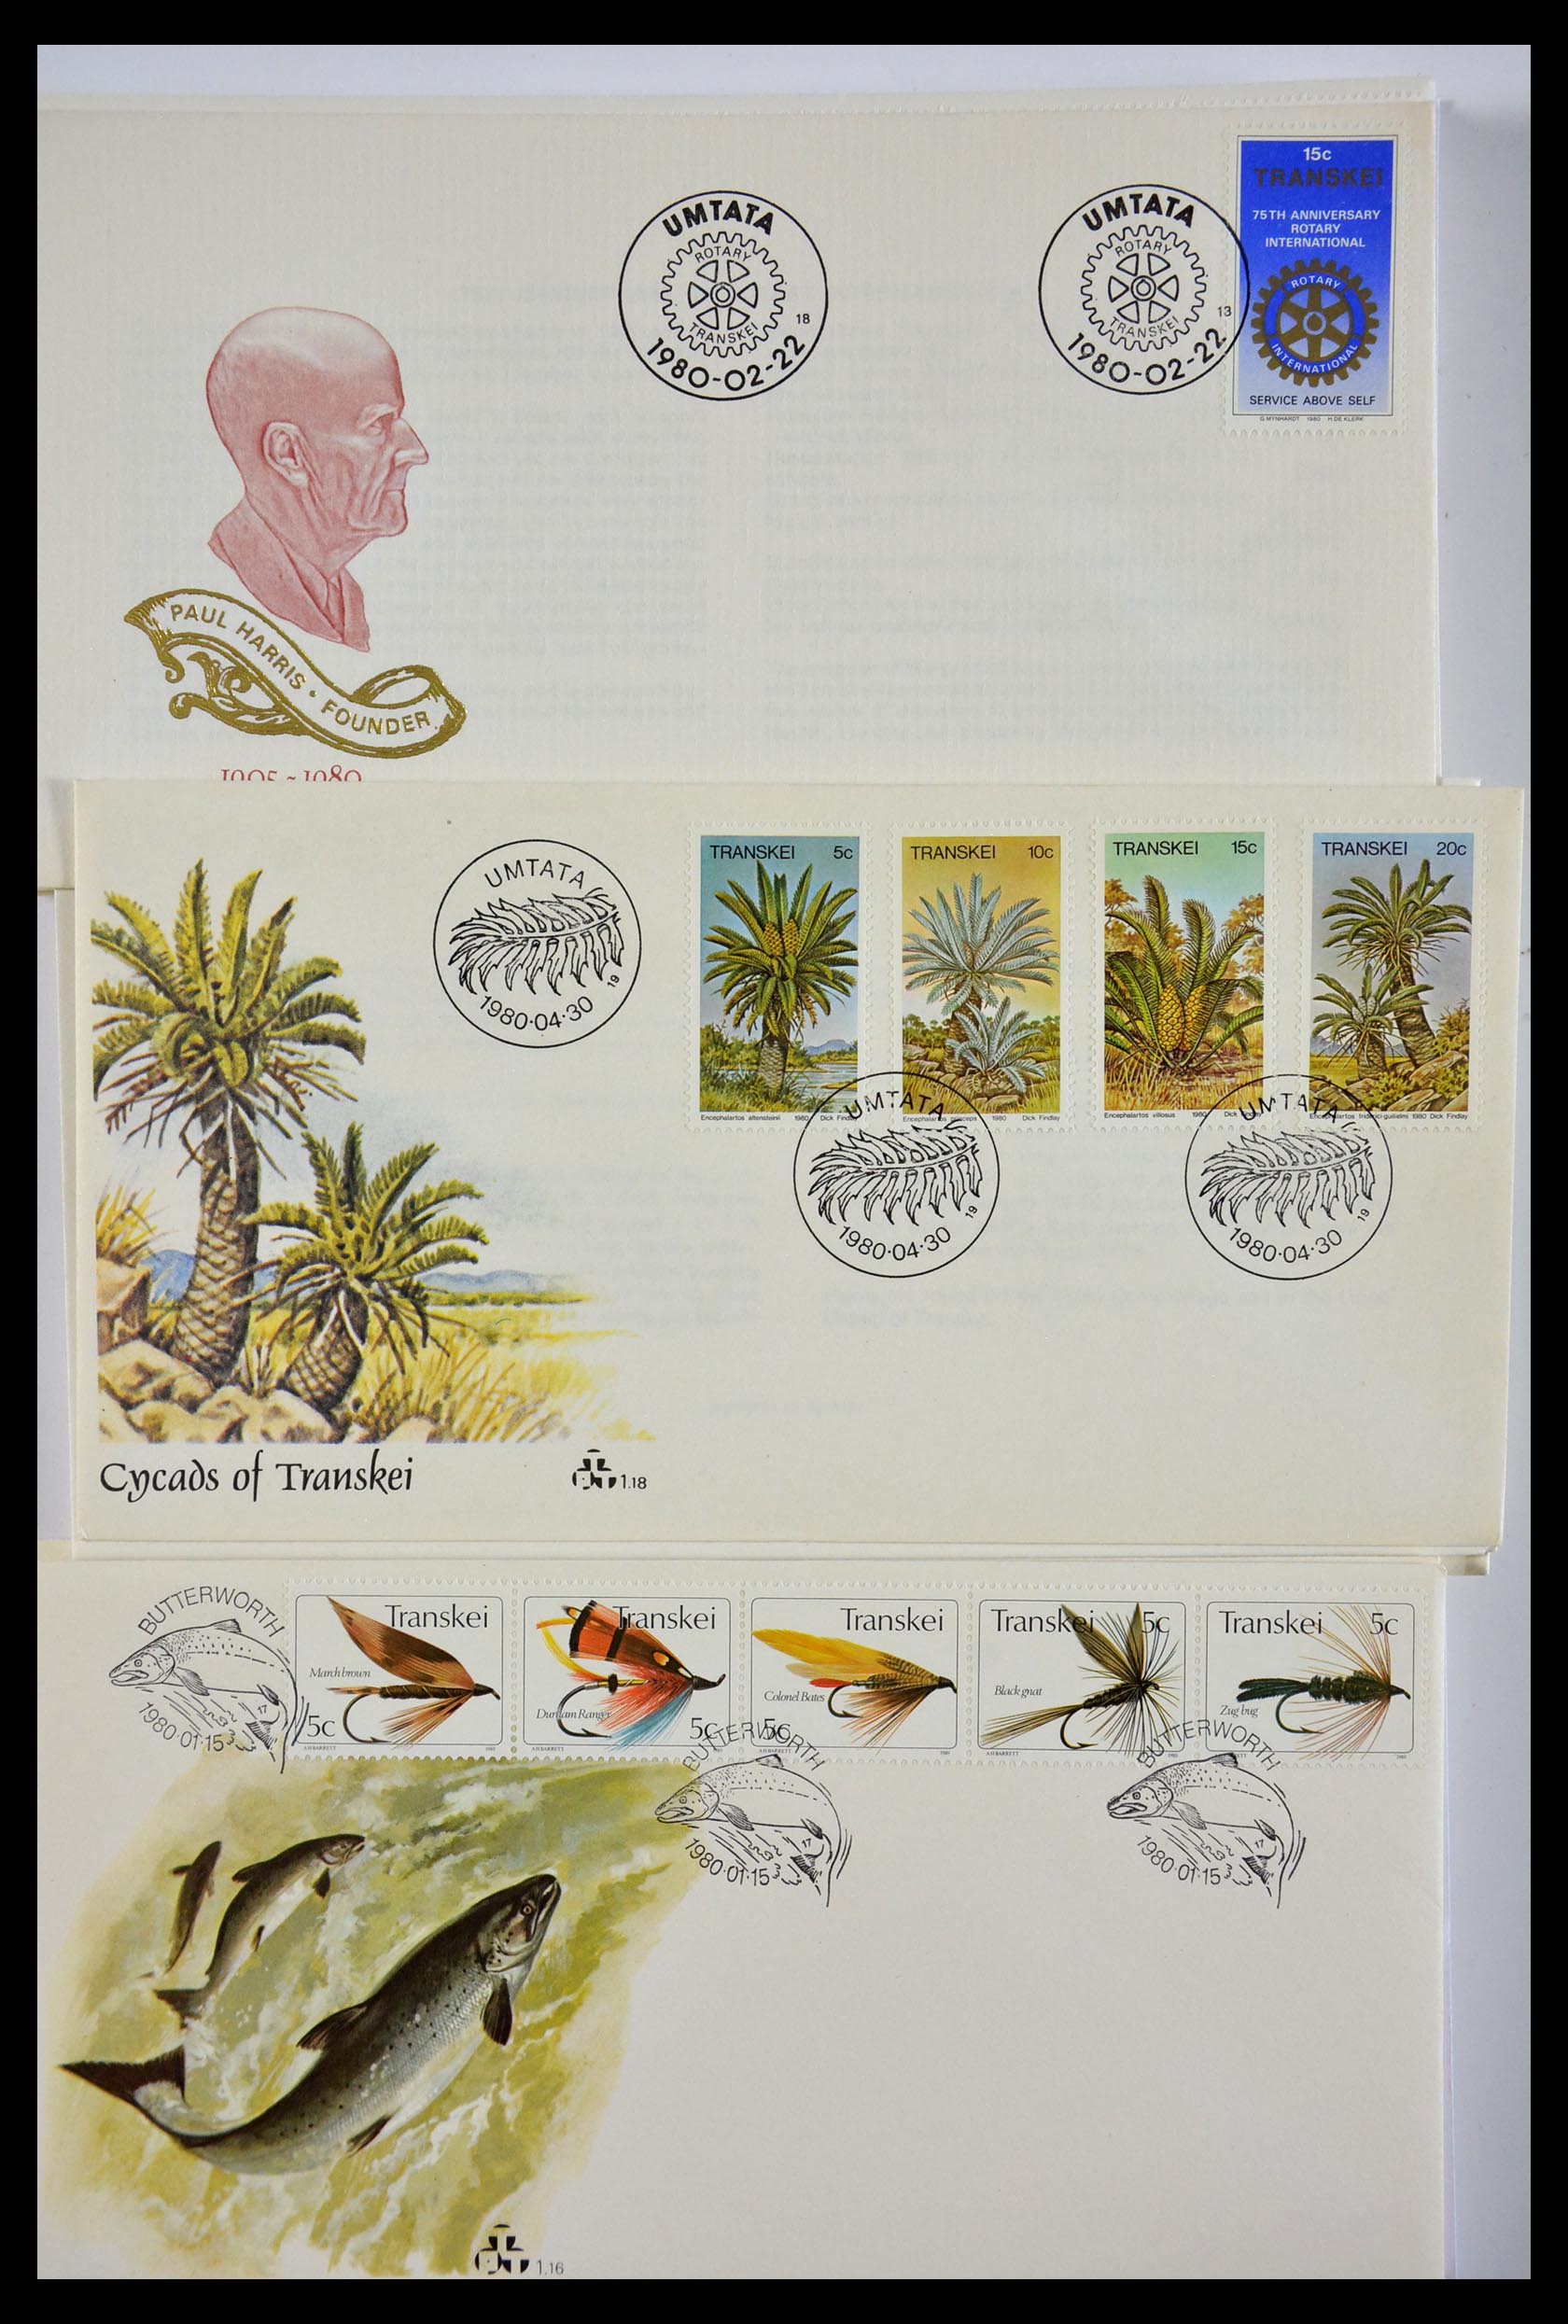 29356 550 - 29356 South Africa homelands first day covers 1979-1991.